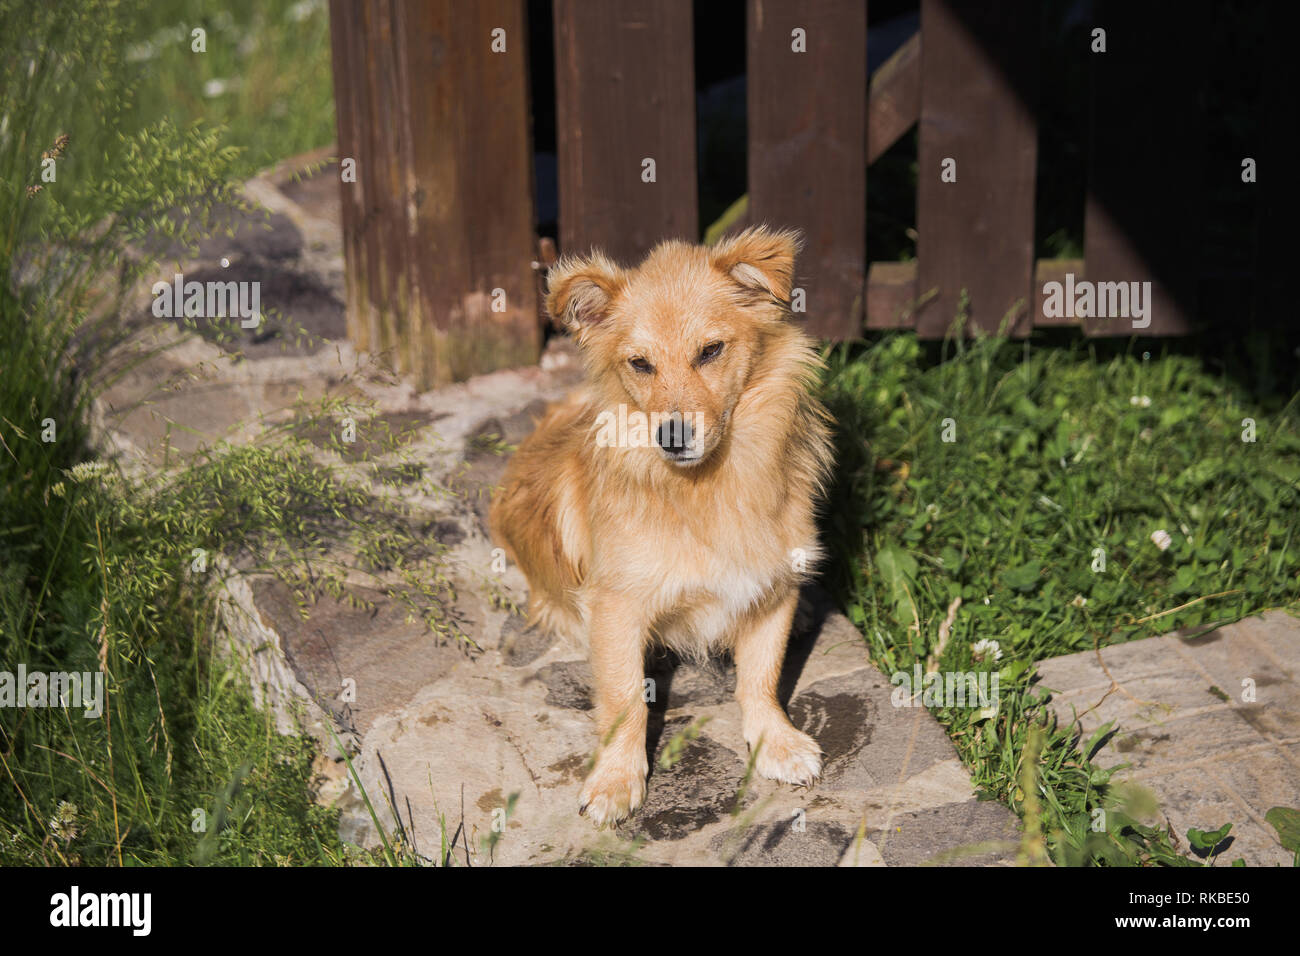 Portrait of cute small yellow mongrel dog laying in grass outdoors. Horizontal color photography. Stock Photo